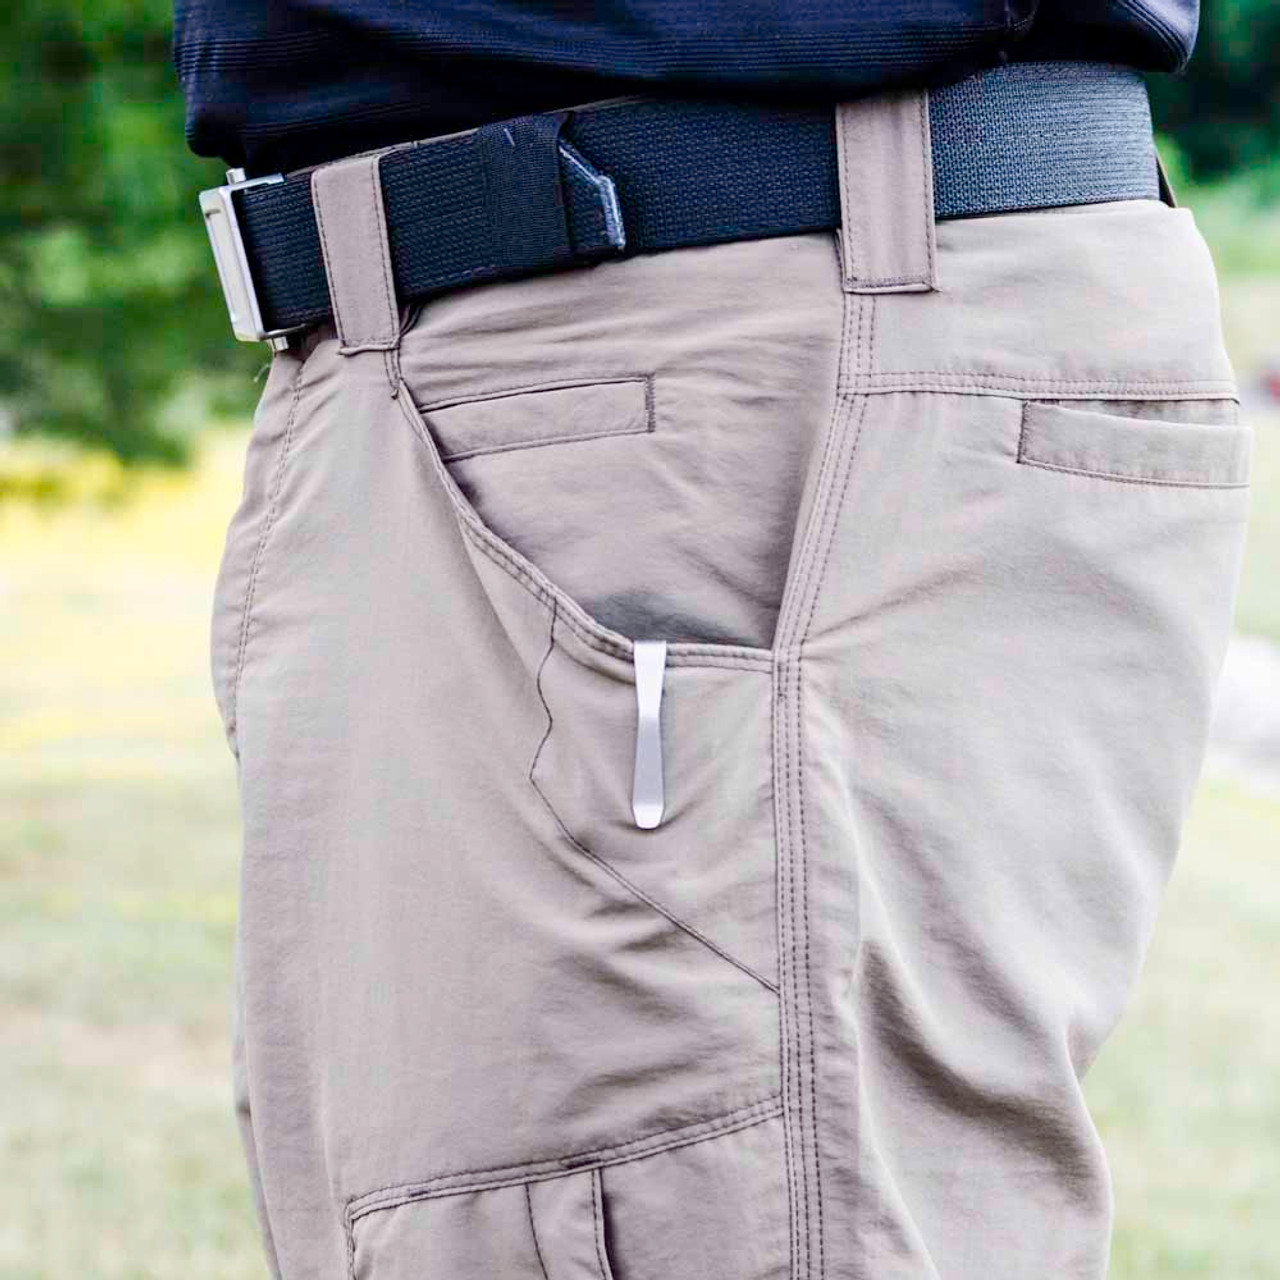 NeoMag In-The-Pocket Mag Carrier | Tulster